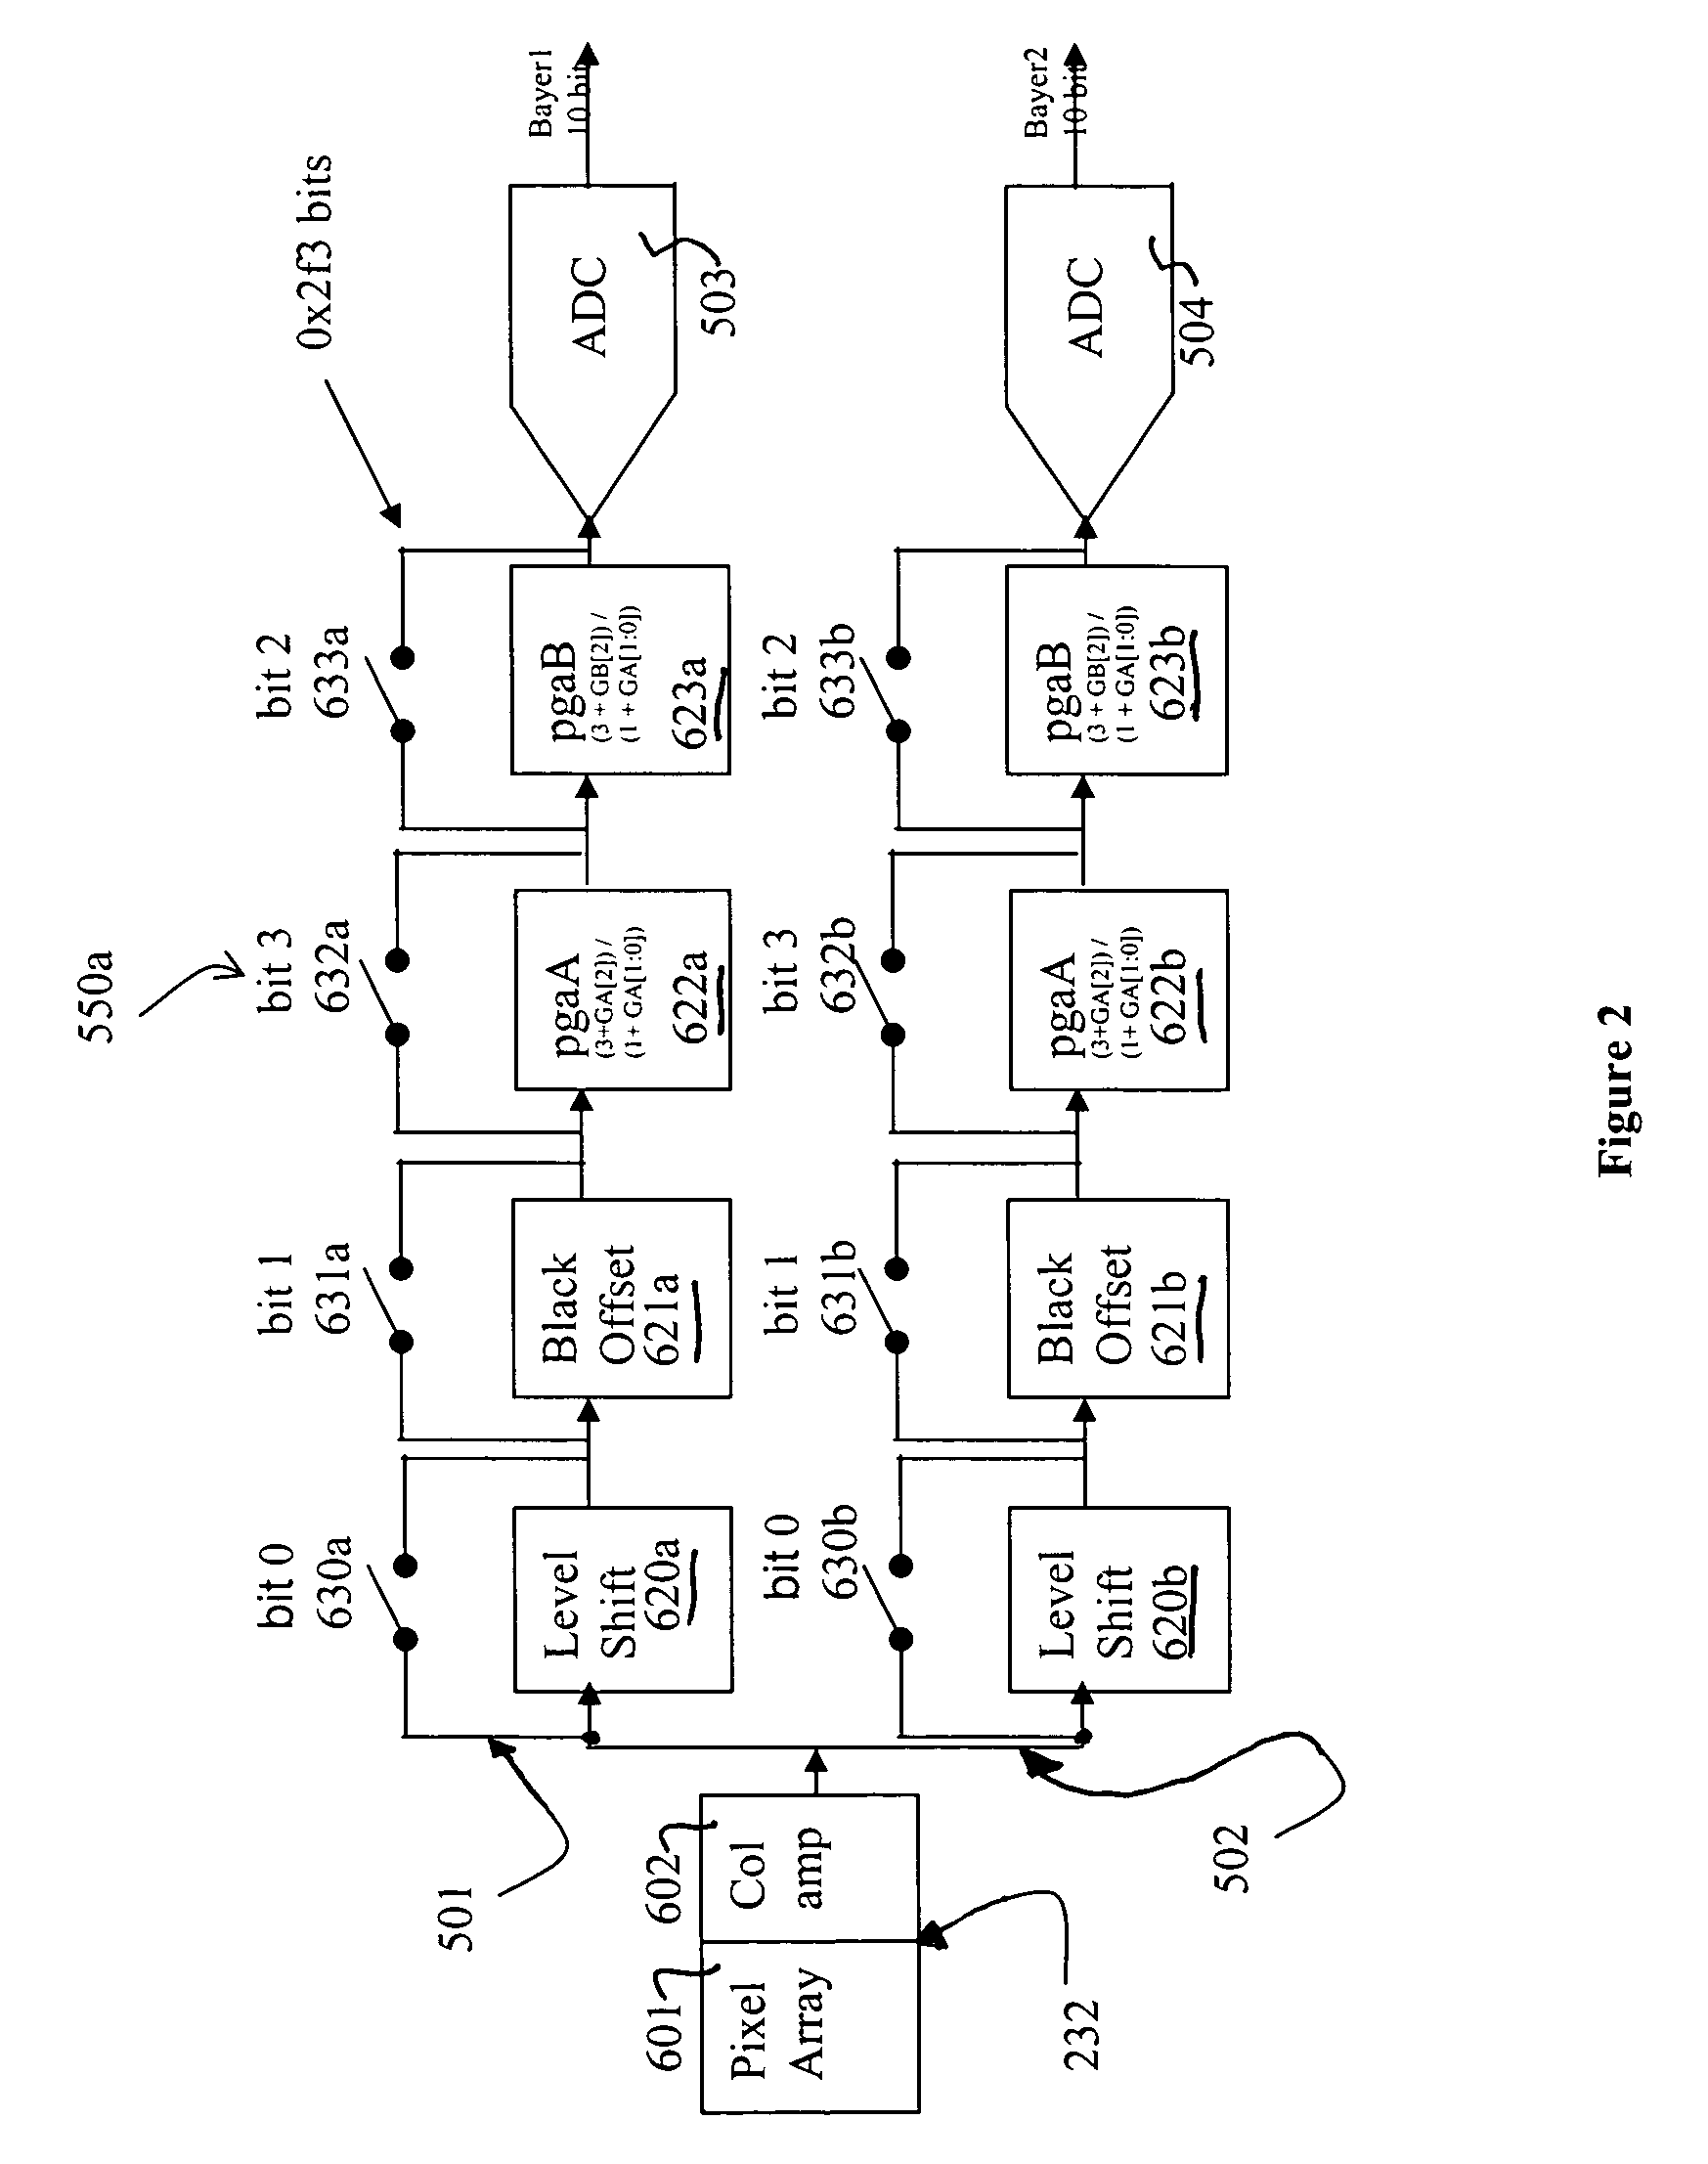 Systems and methods for power conservation in a CMOS imager